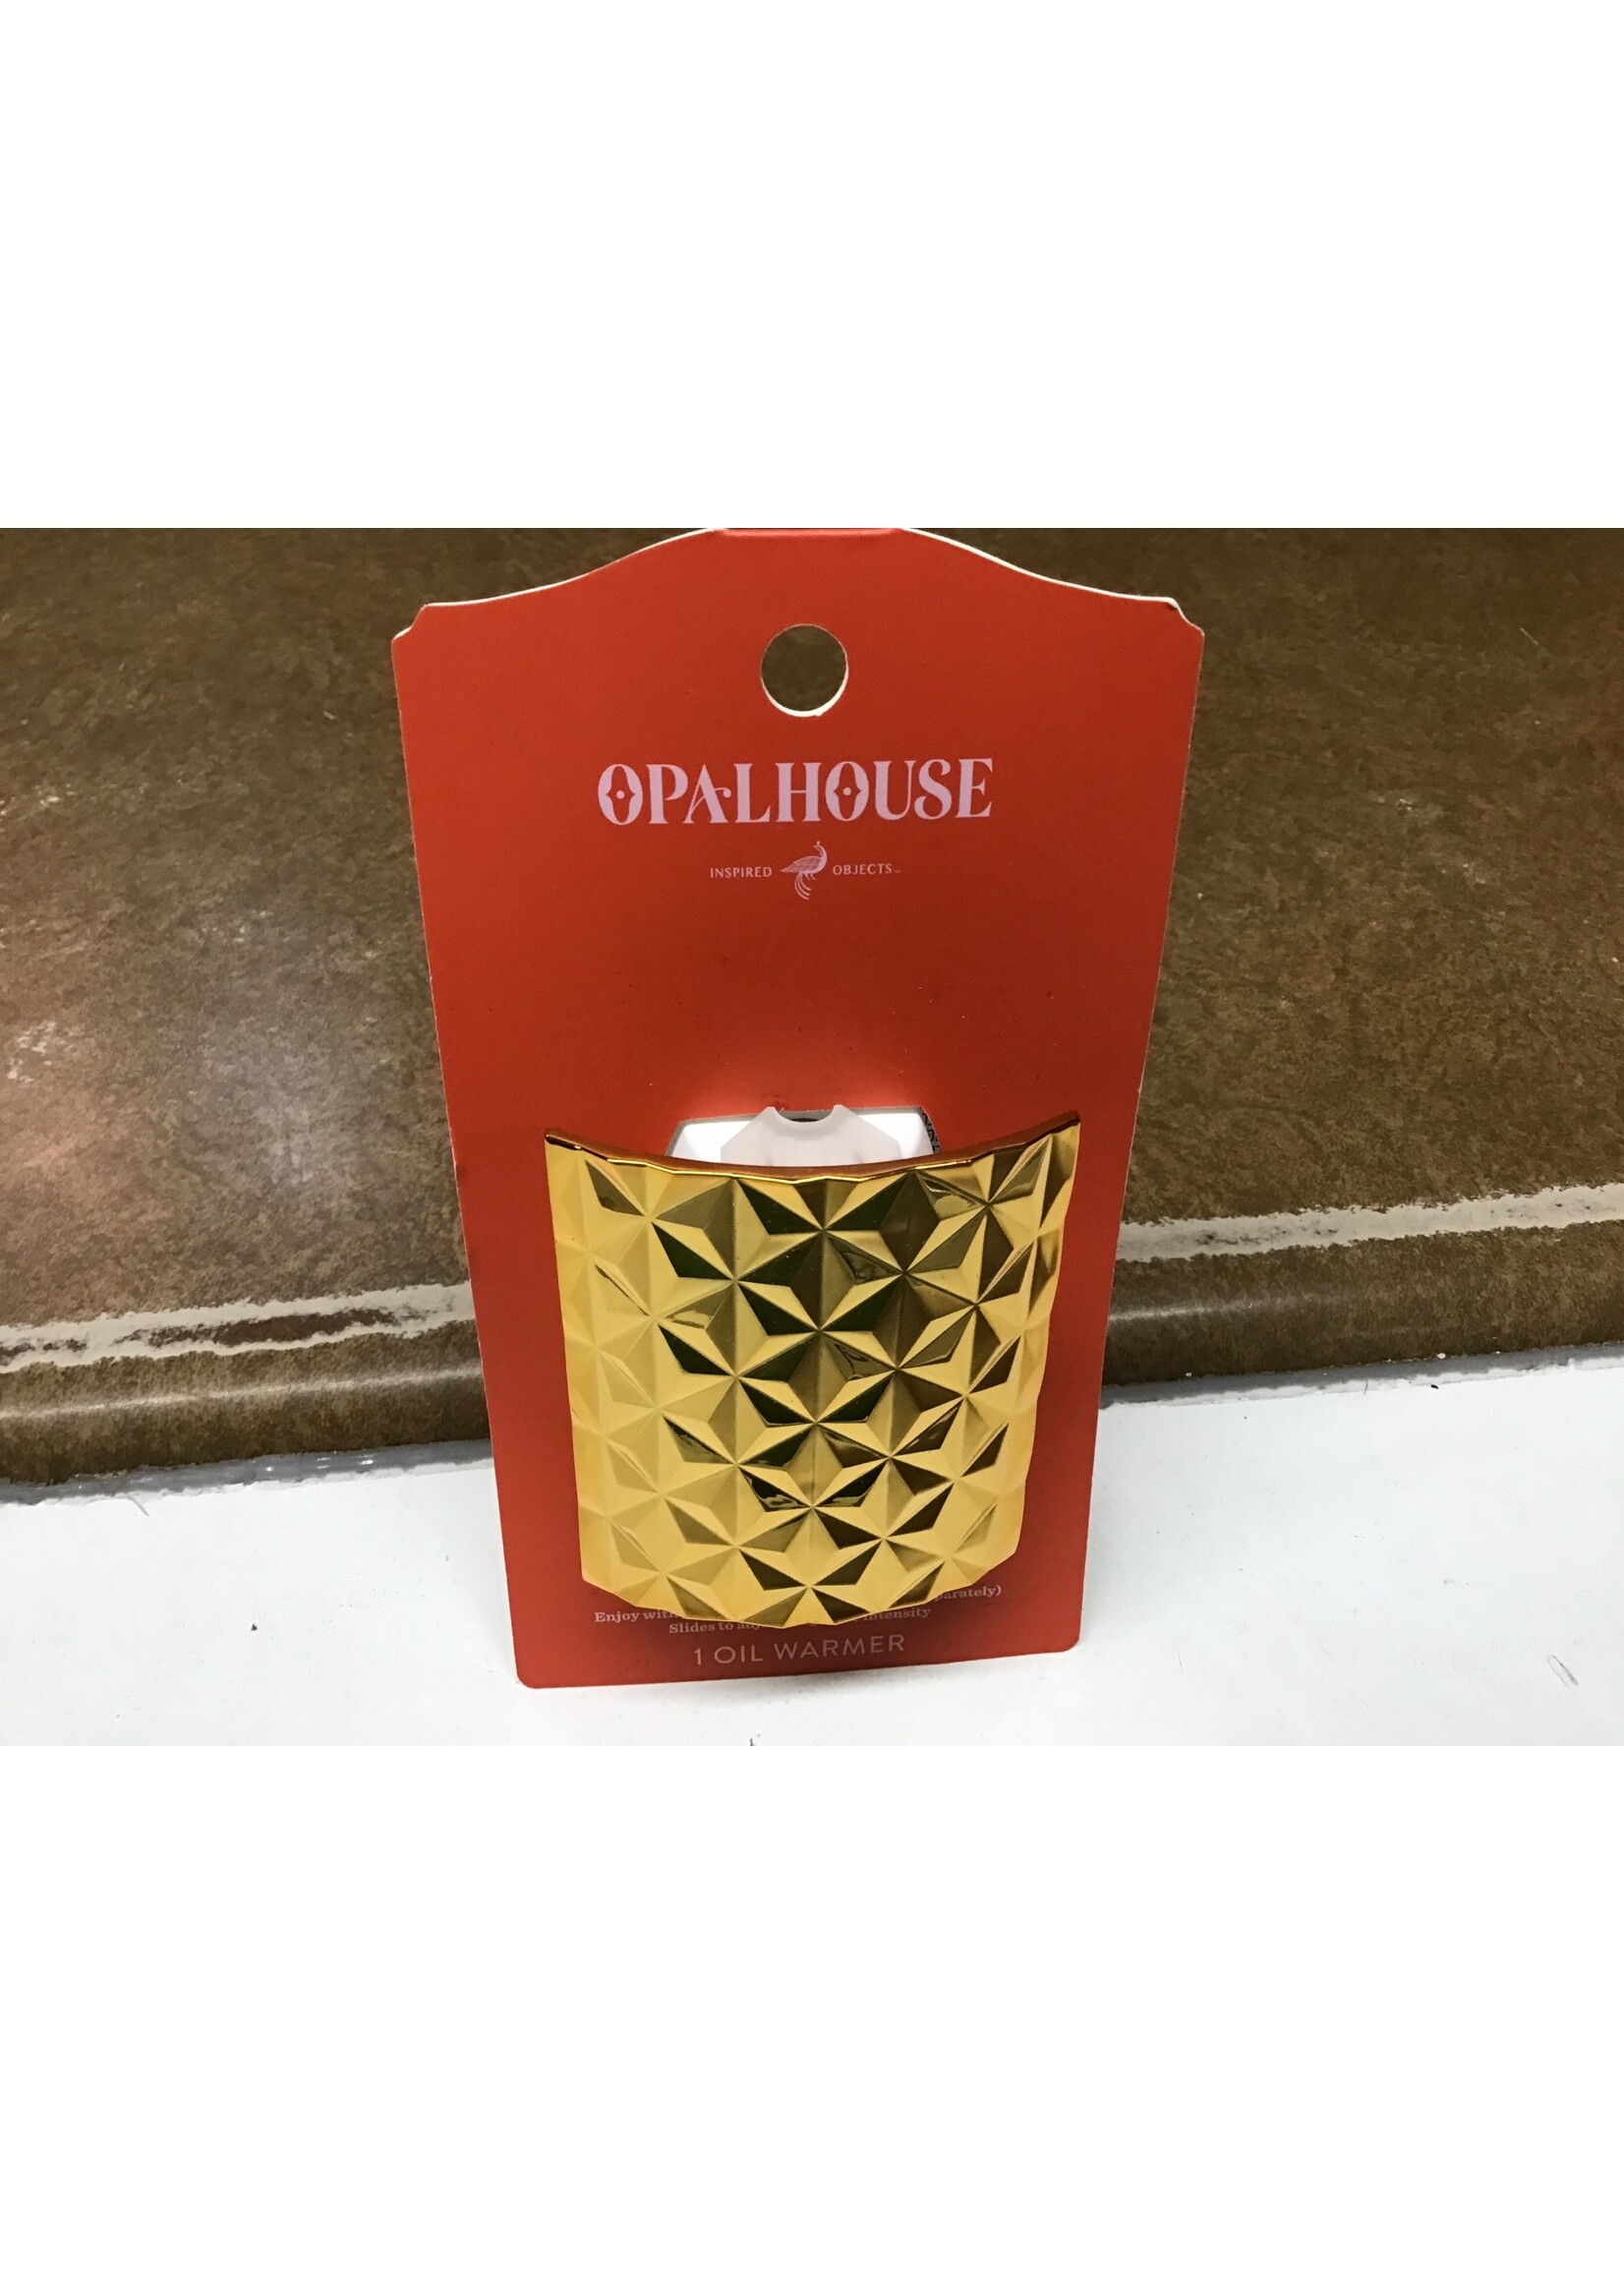 Opal House OpalHouse Scented Oil Warmer gold